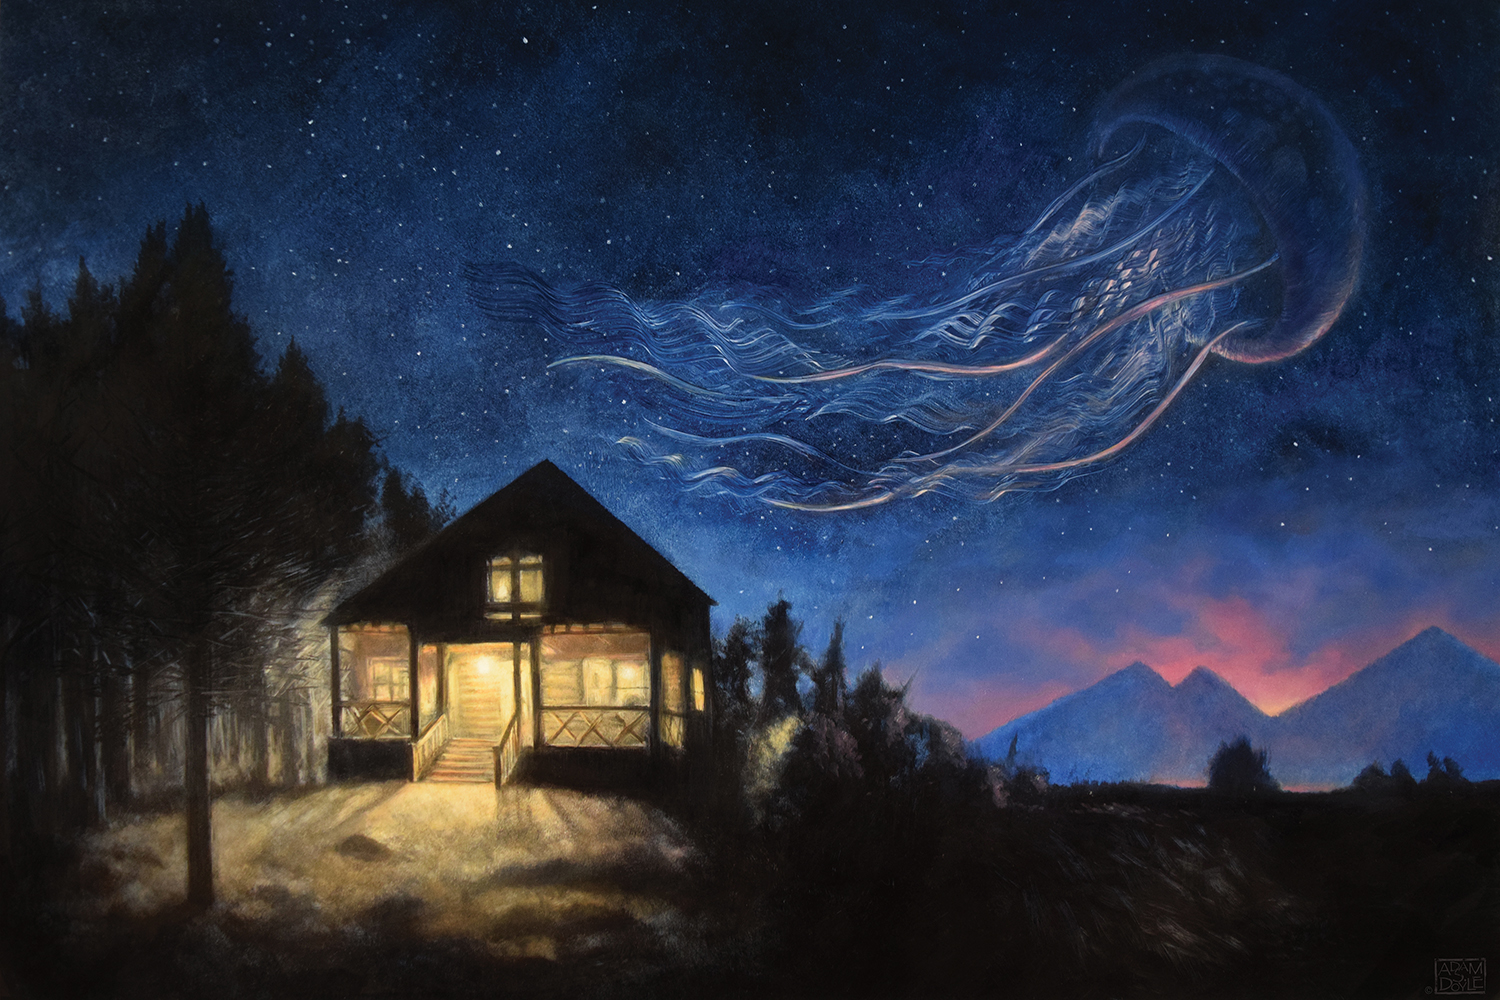 a cabin in the woods at night with a large jellyfish in the sky